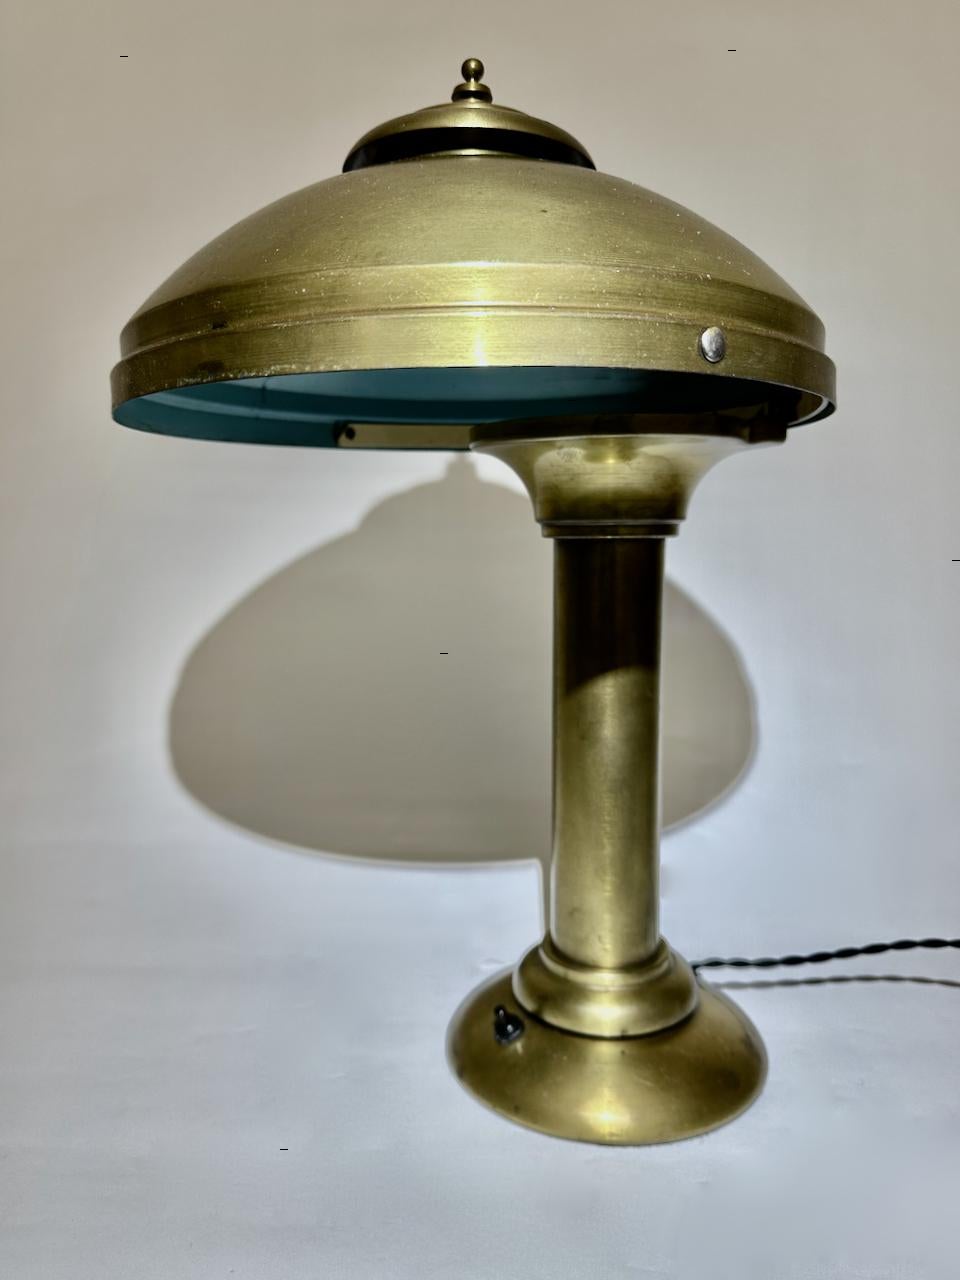 Fairies Mfg. Co. Cantilever All Brass Shaded Desk Lamp, 1920s For Sale 4